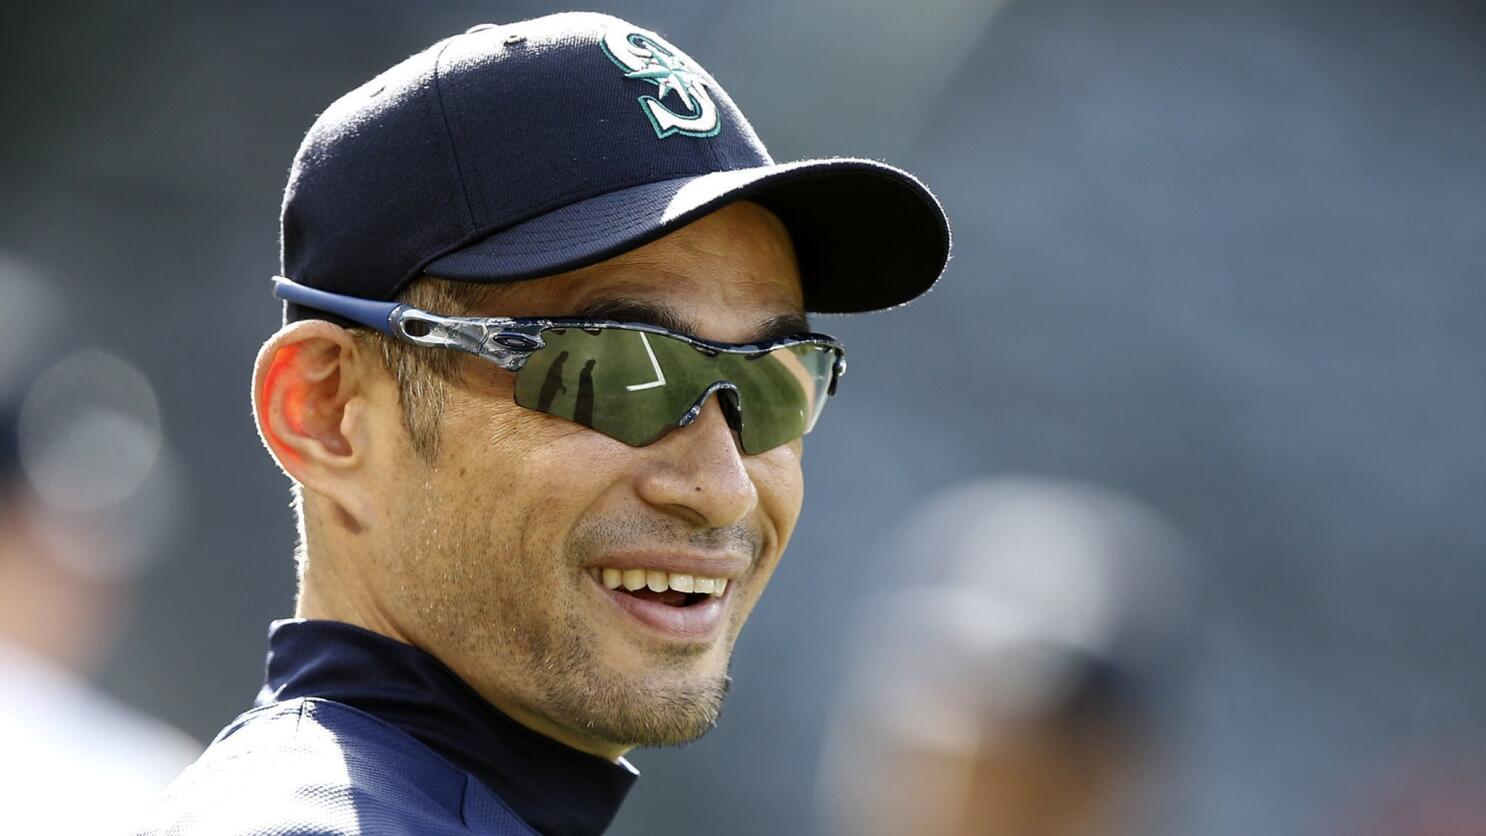 As the Mariners open 2019 season in Japan, Ichiro receives a